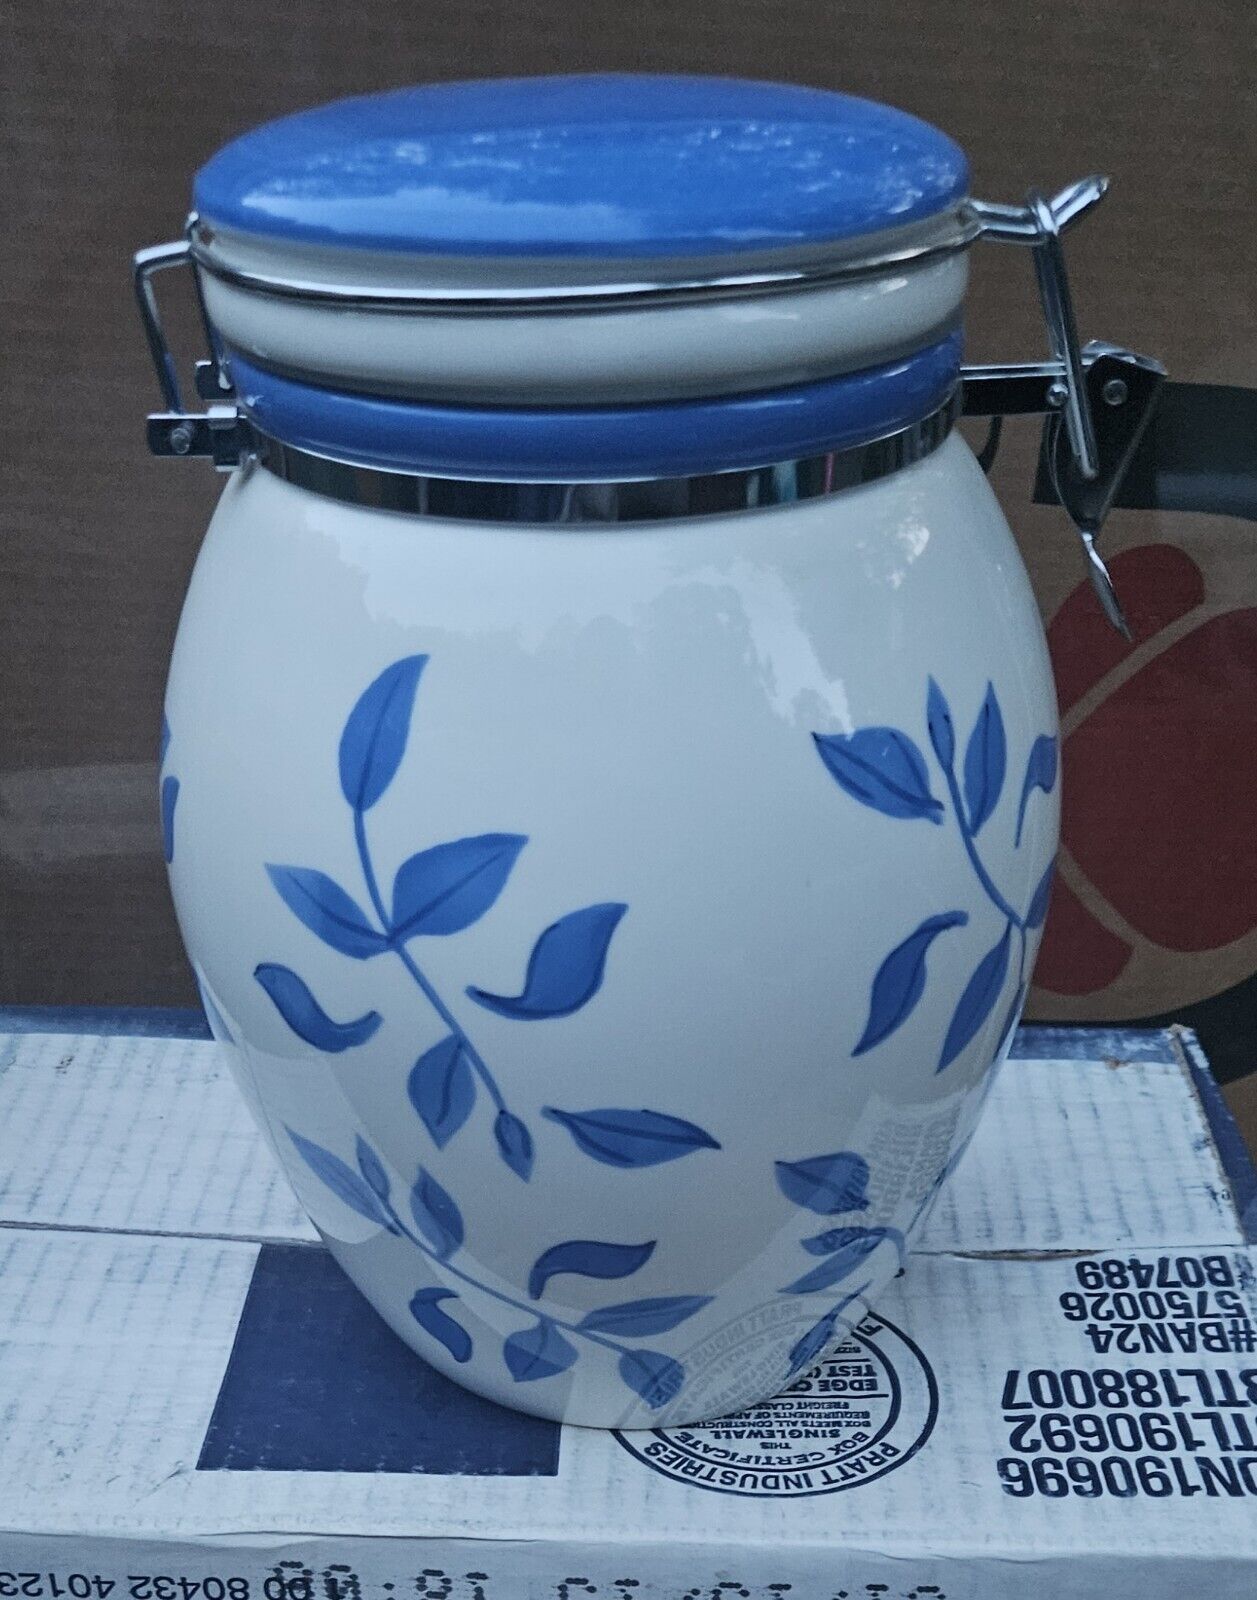 INSPIRADO CANISTER COOKIE JAR WHITE BLUE VINES HAND PAINTED HINGED LID 9.75”